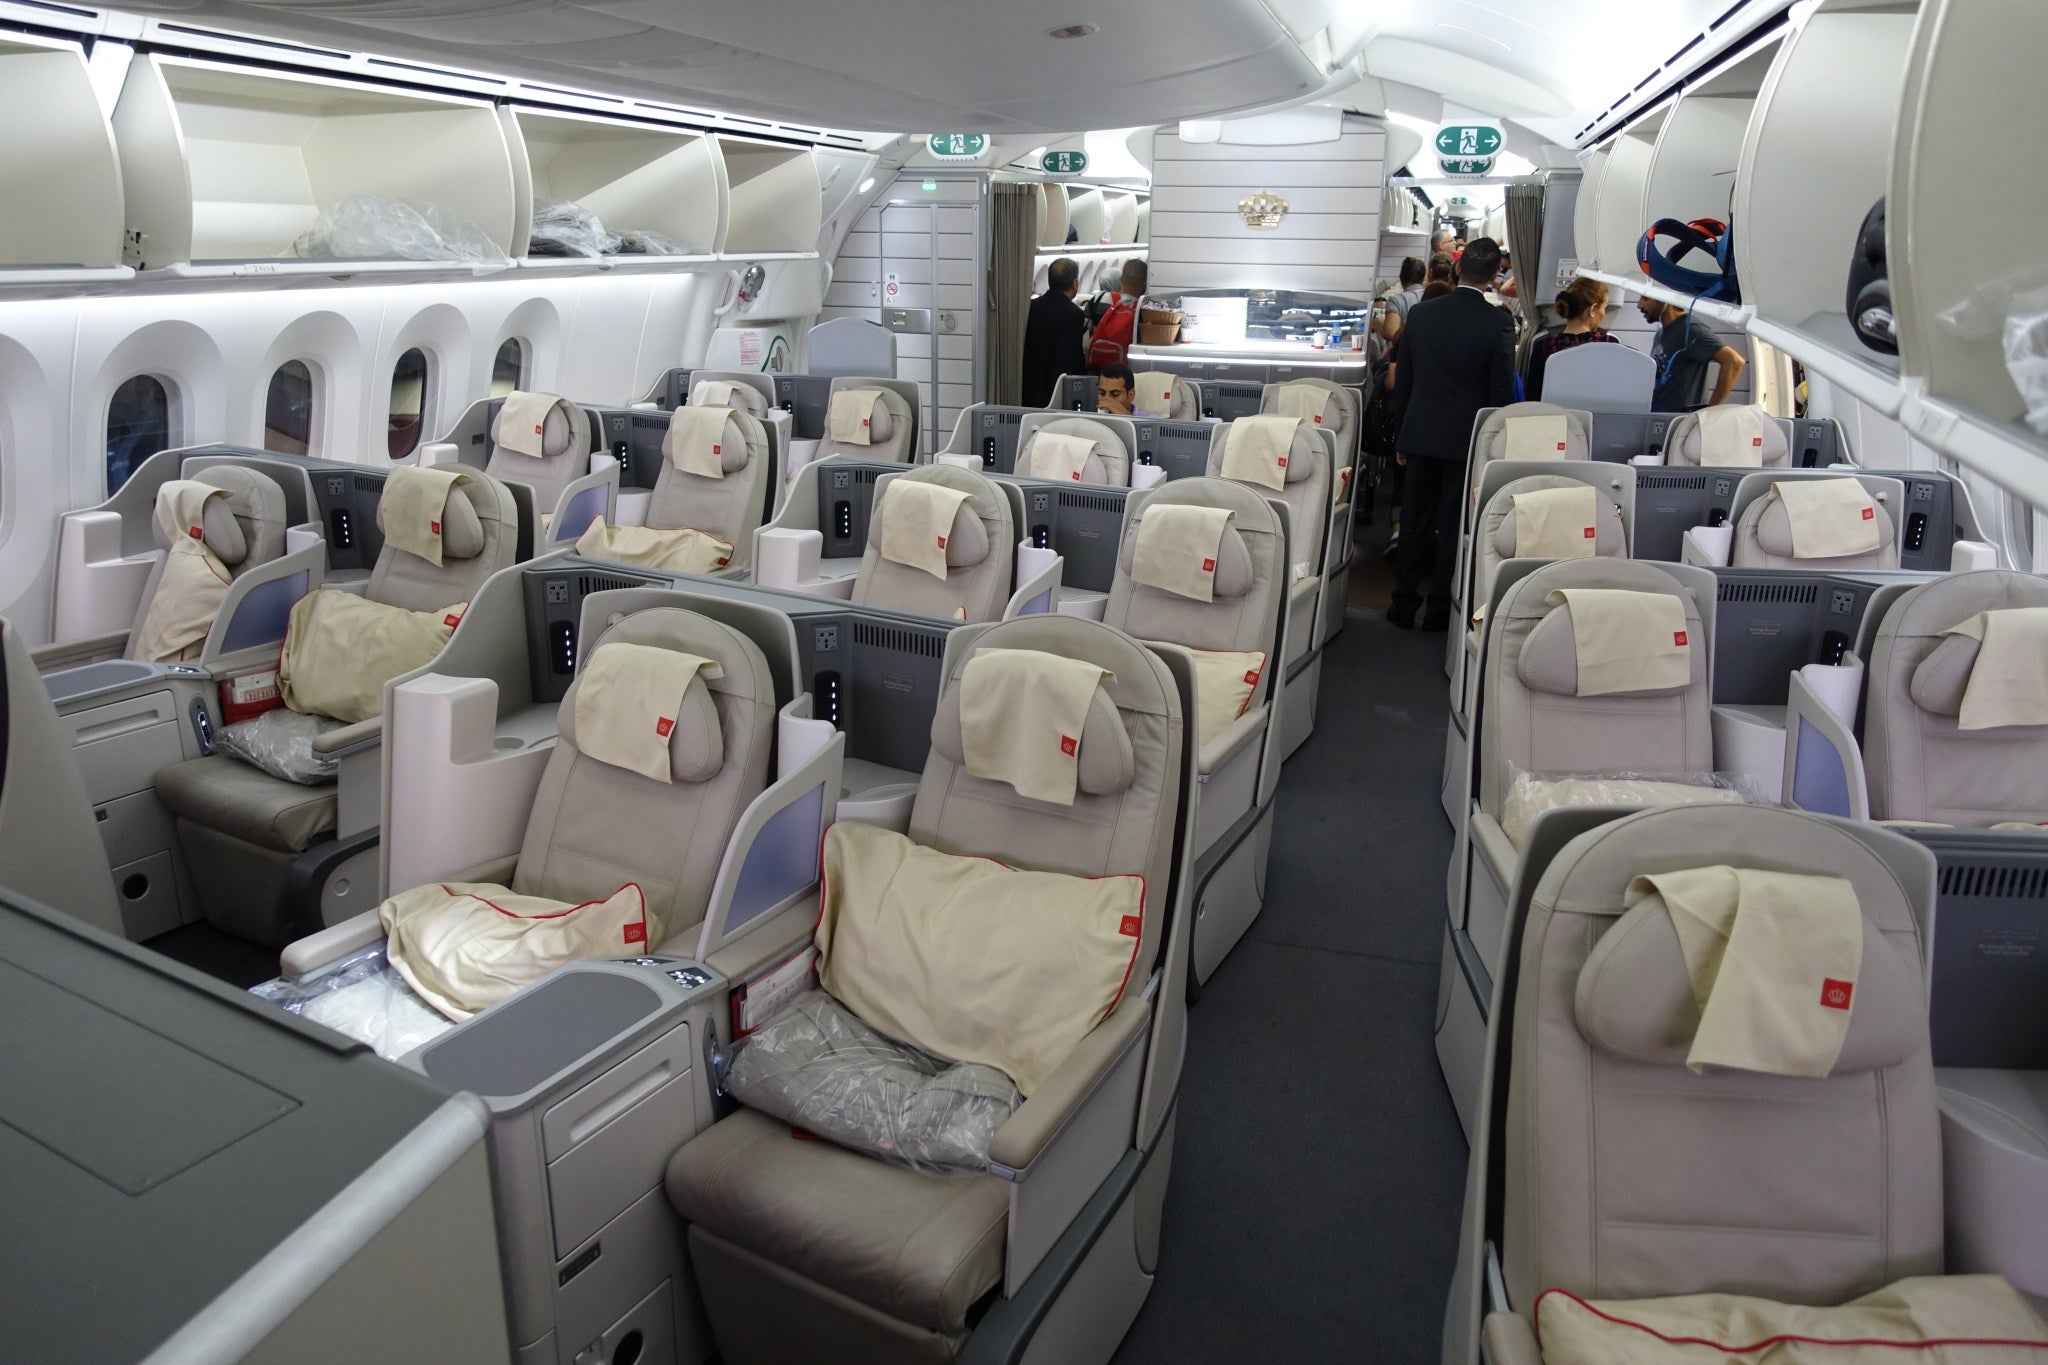 Business class on Royal Jordanian's Boeing 787. (Photo by Brendan Dorsey / The Points Guy)